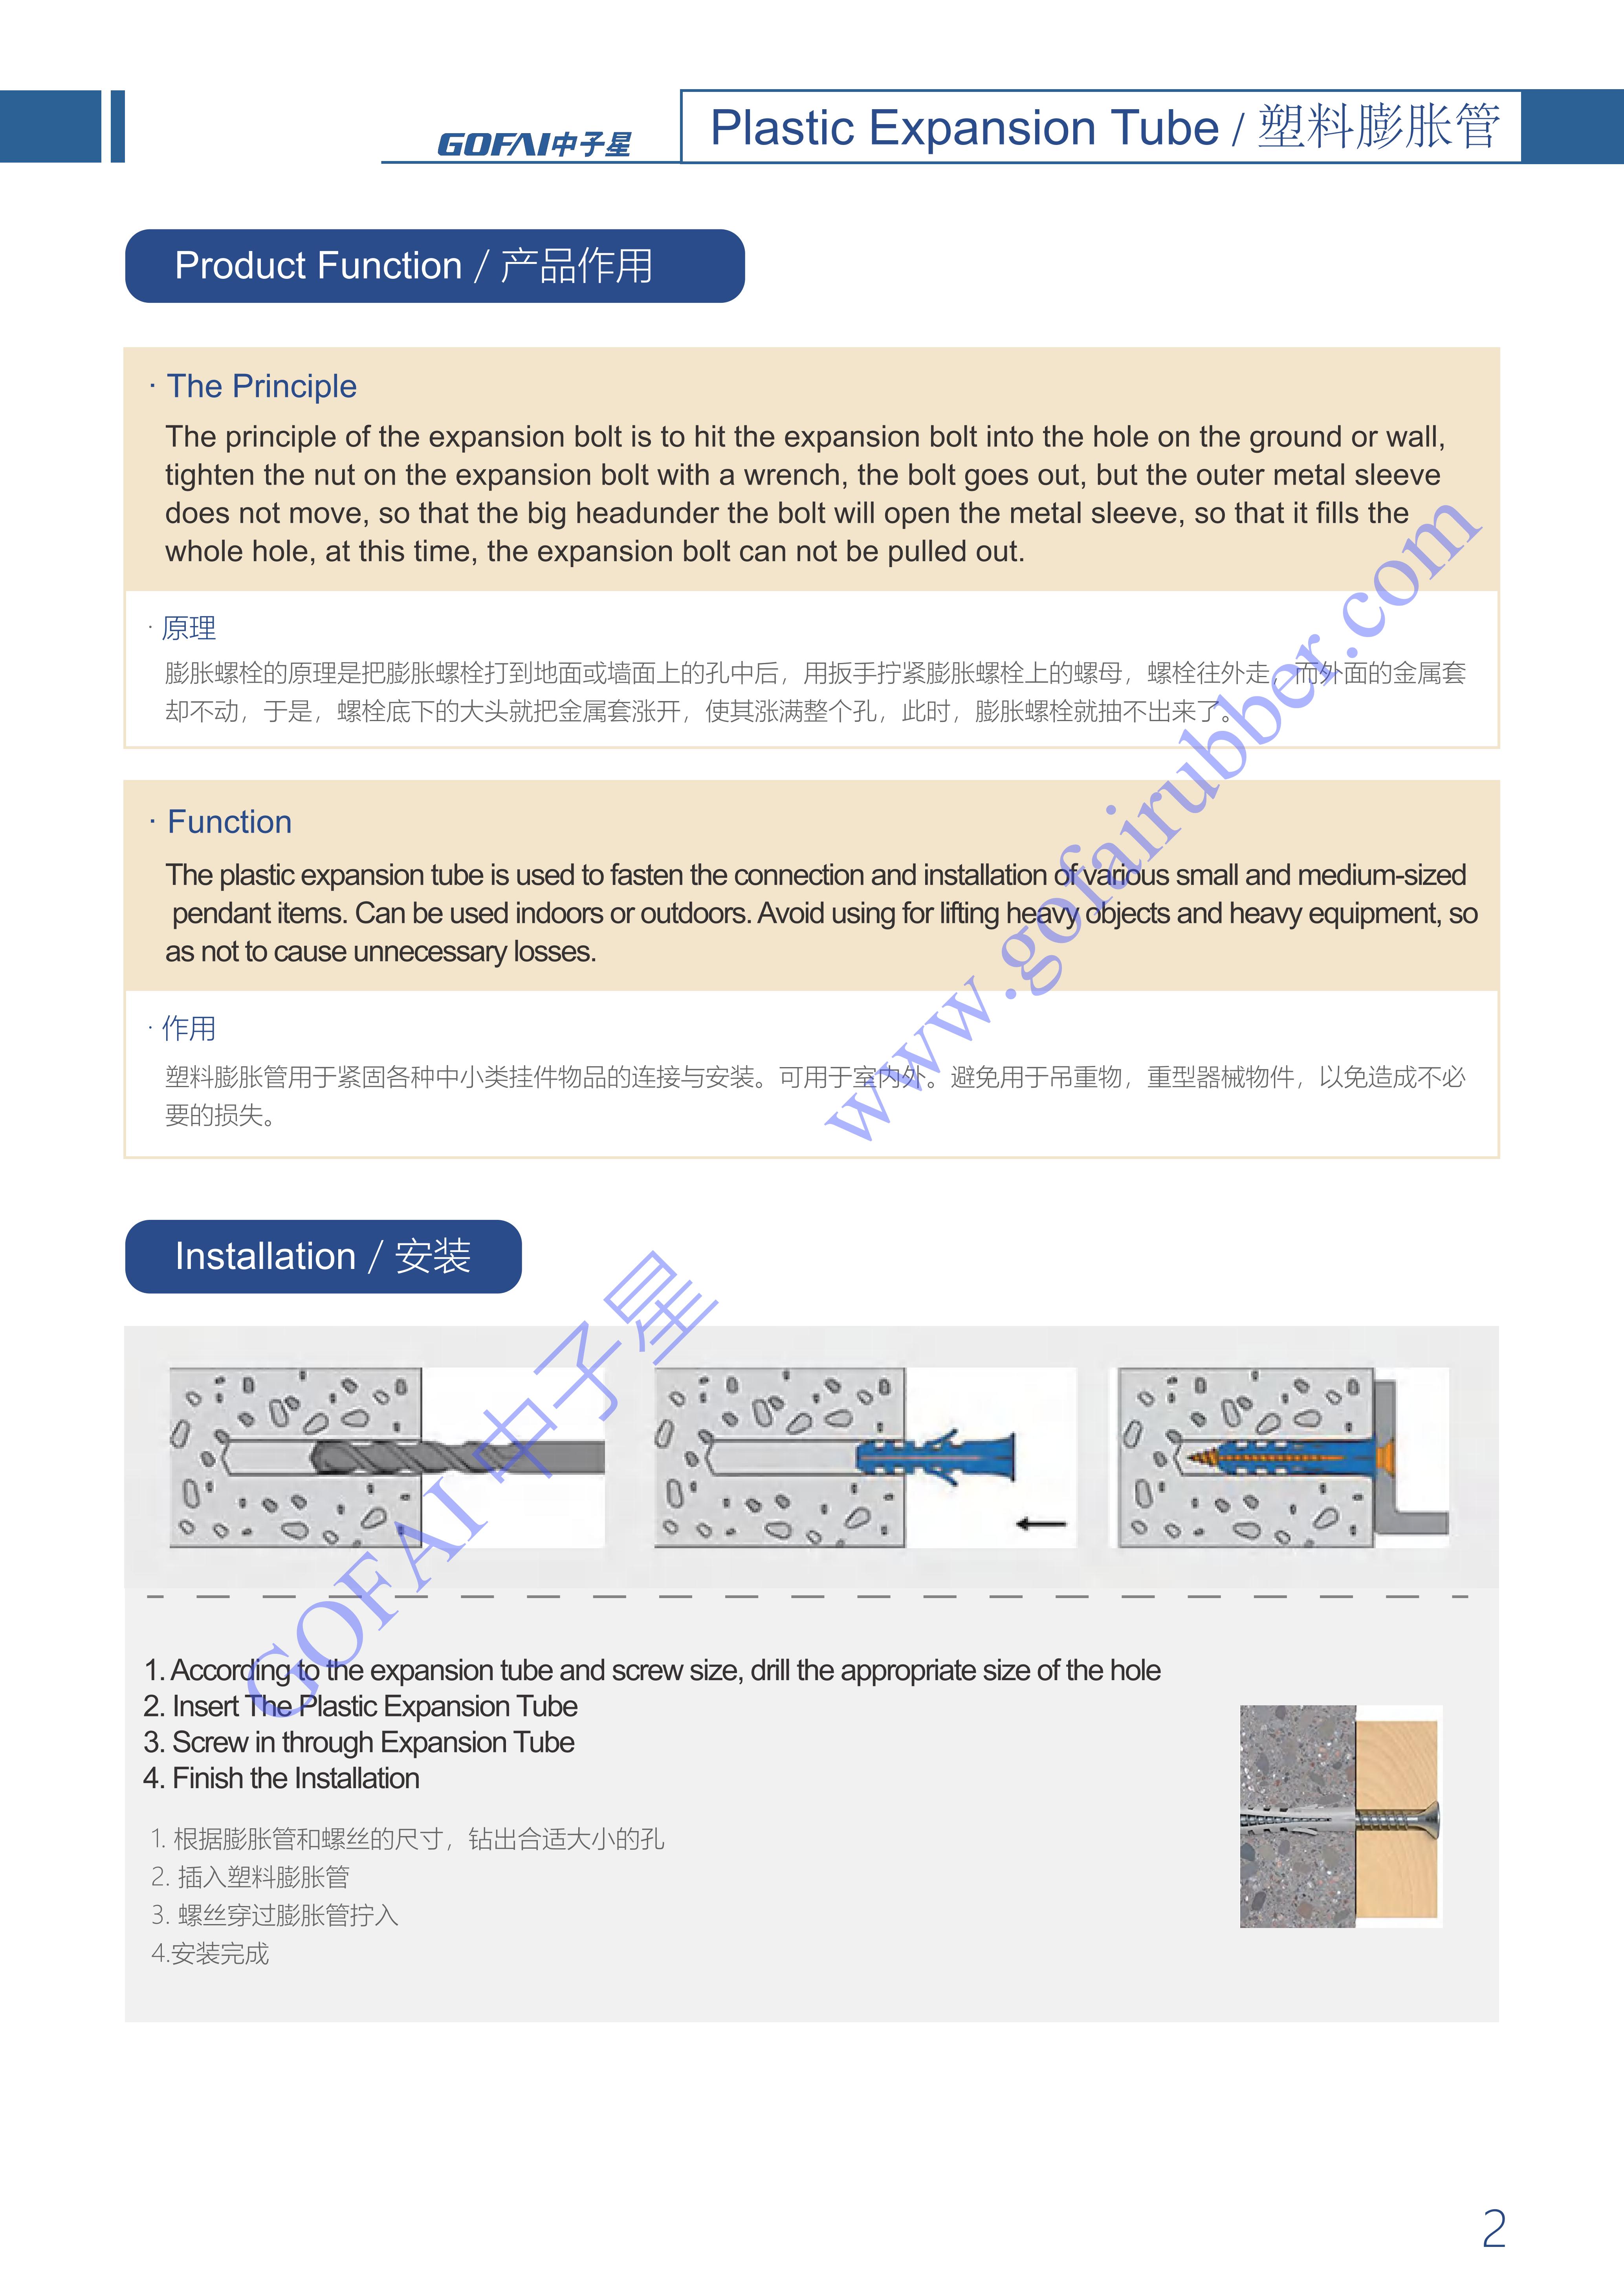 GOFAI Plastic Expansion Tube Series Products Brochure_3.jpg